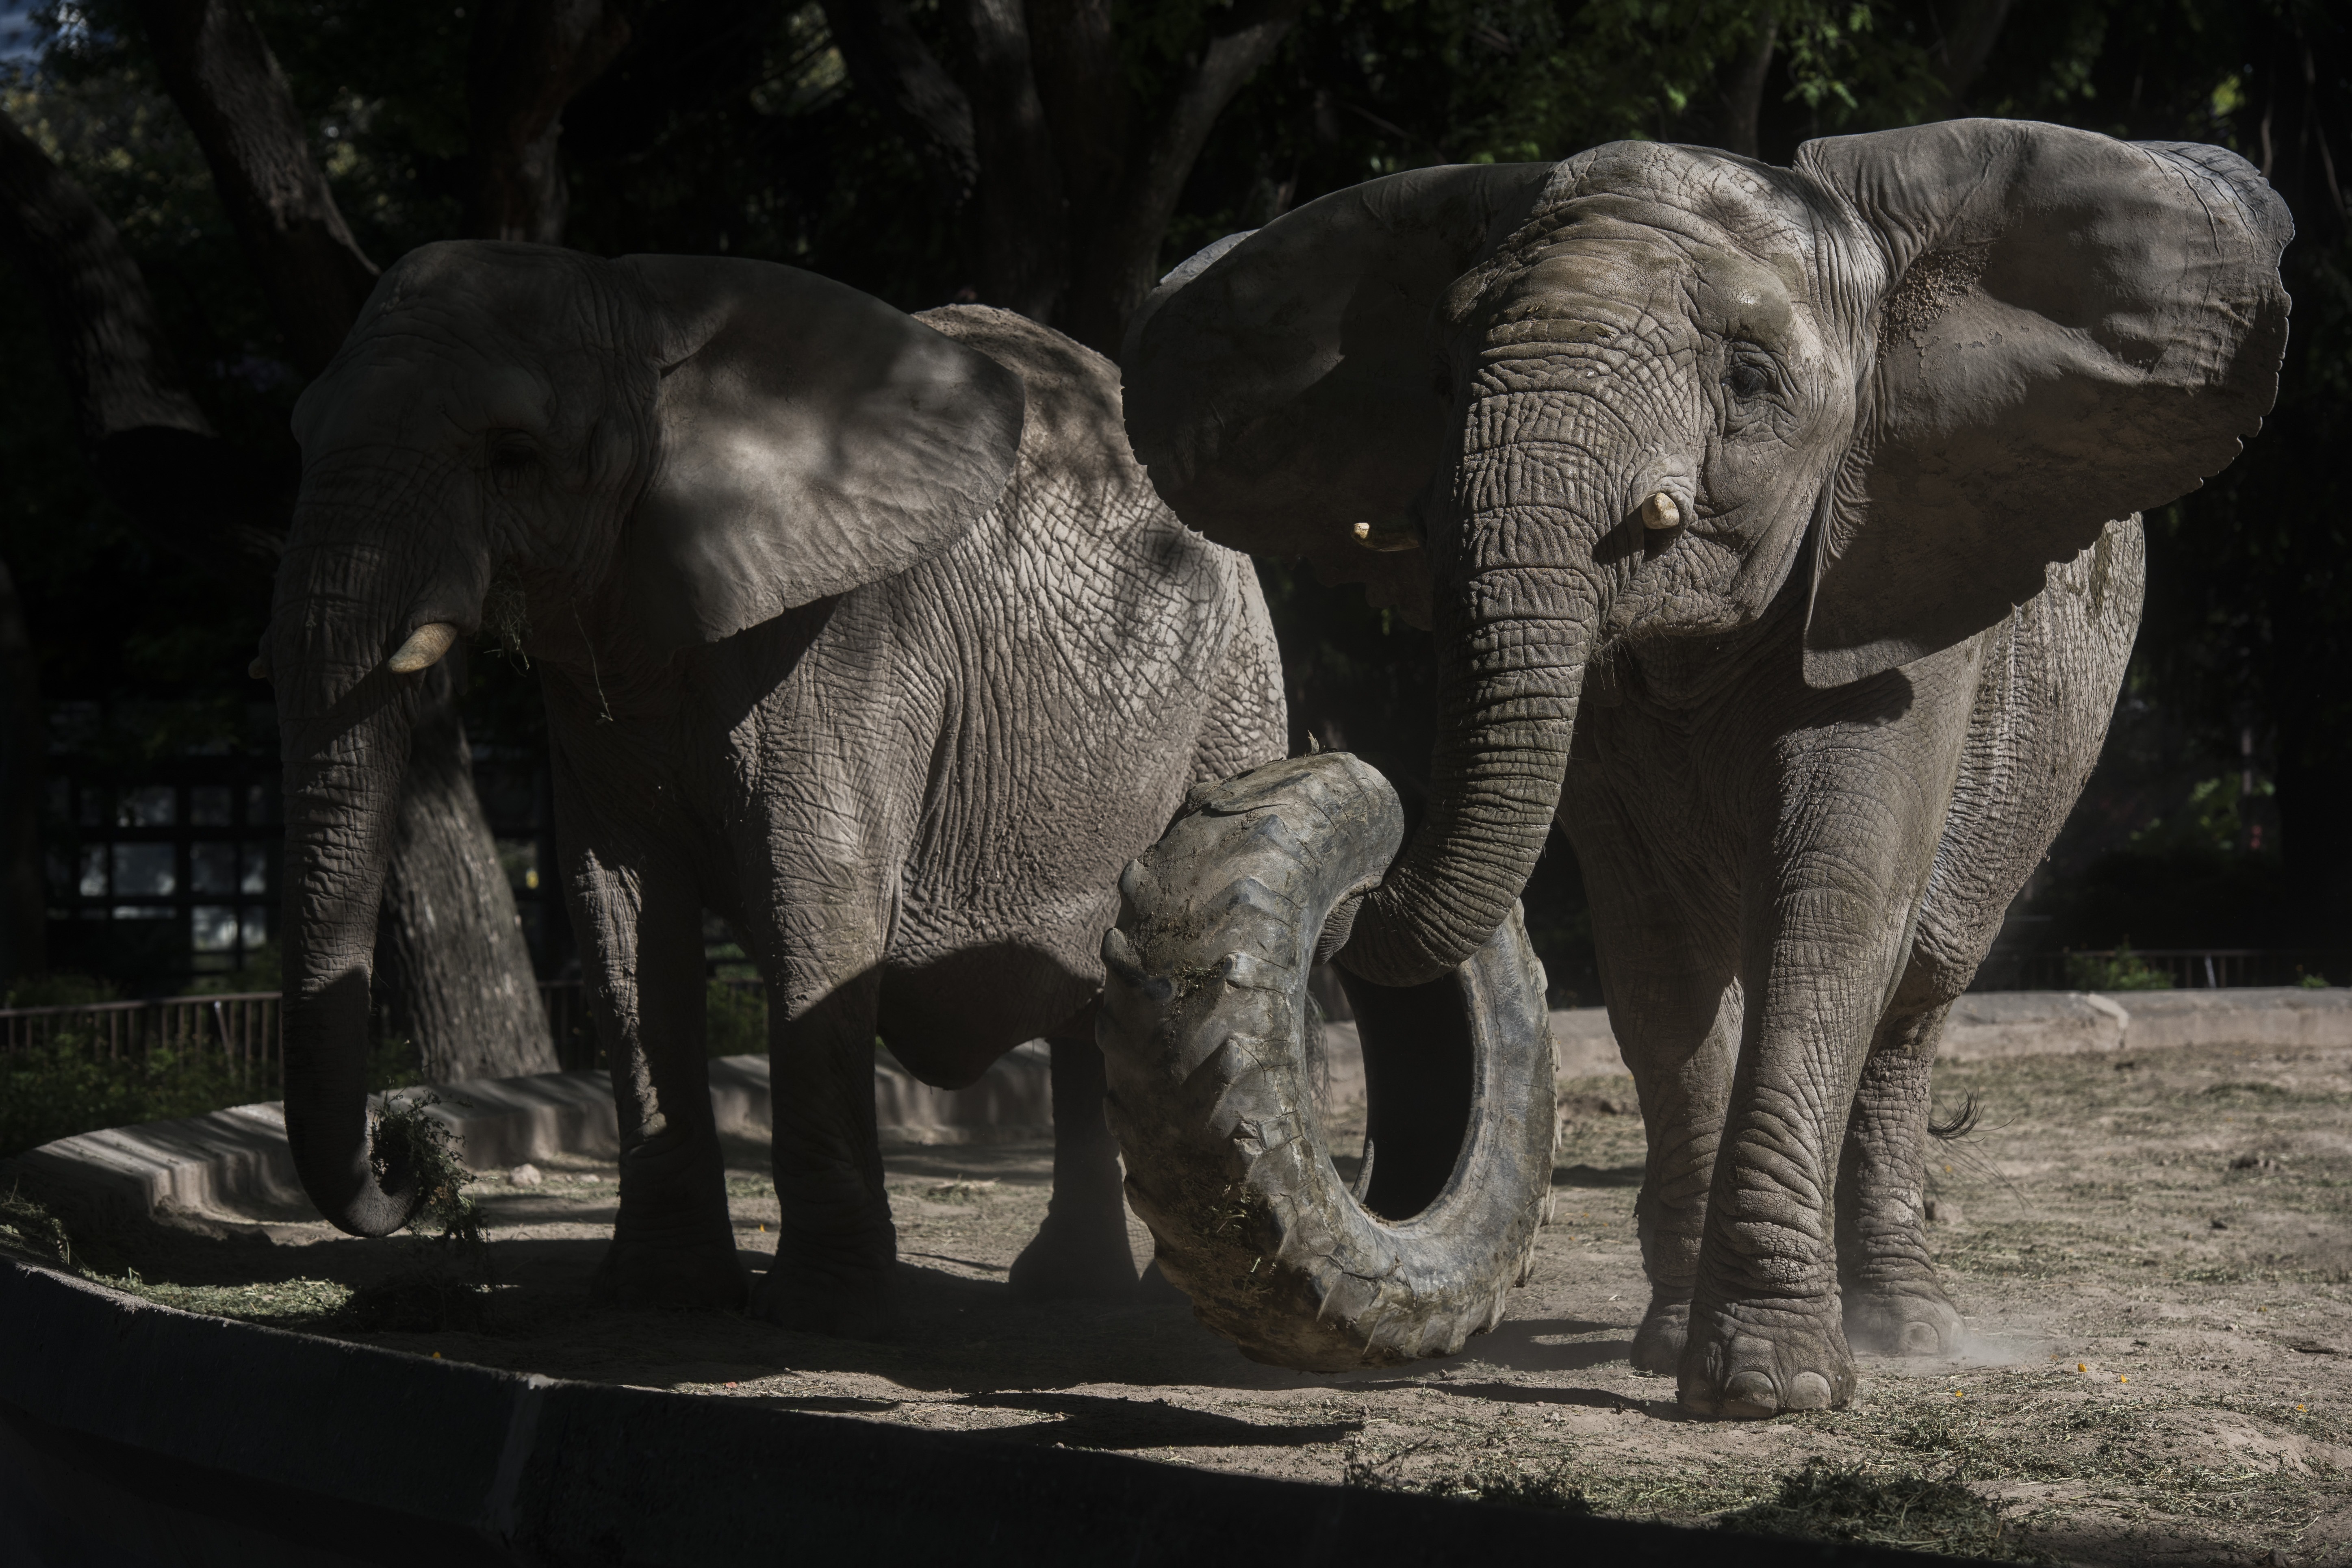 Asian elephants Pupi (R) and Kuki are pictured at Buenos Aires zoo on November 24, 2016. After the unprecedented case of Sandra the orangutan whose rights were recognised by a court, now three elephants from the Buenos Aires' Zoo will have their own lawyers sponsored by an NGO for alleged 'animal abuse'. / AFP PHOTO / EITAN ABRAMOVICH